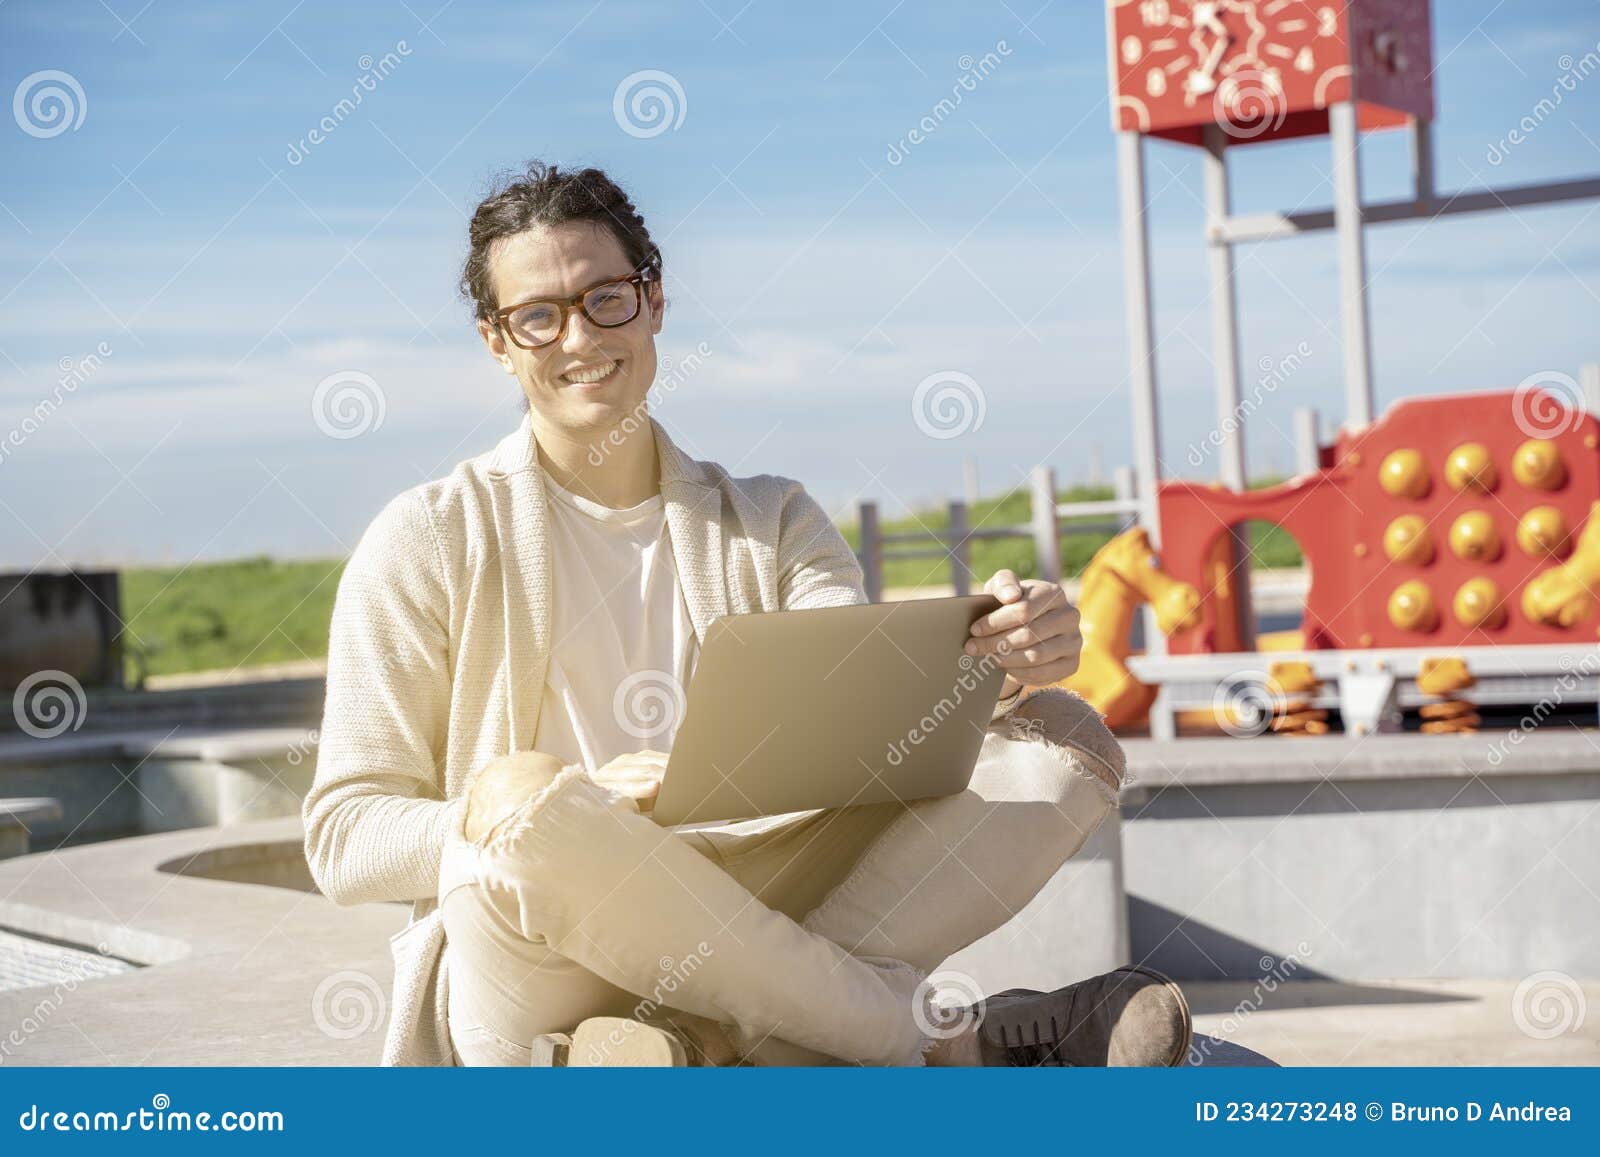 smiling in smartwork with laptop